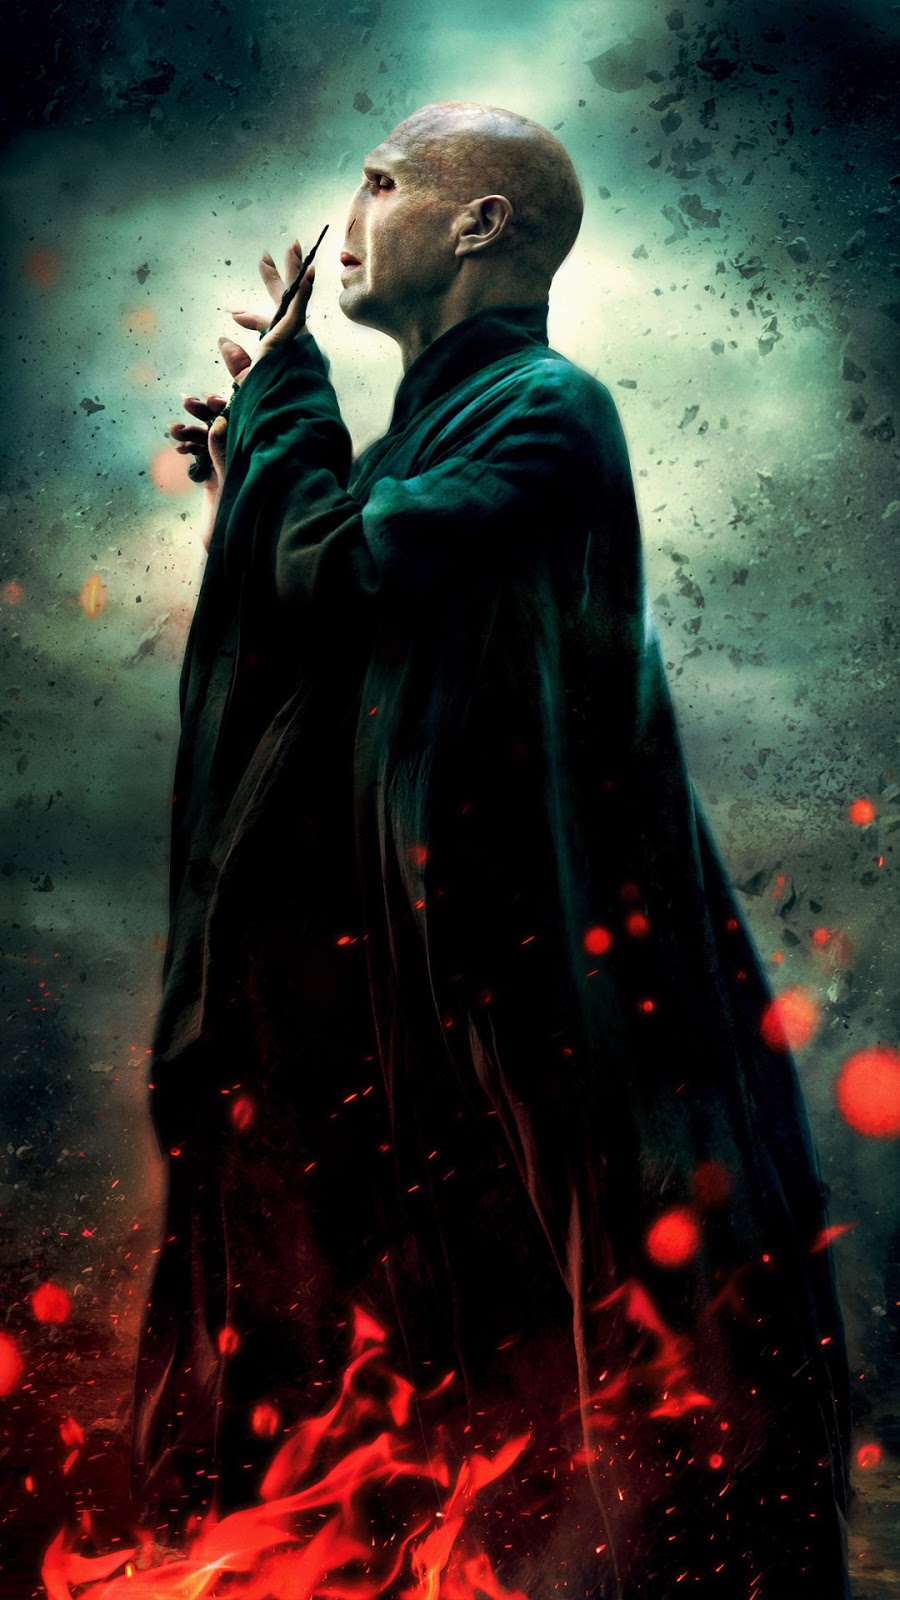 melhores wallpapers para android,movie,poster,darkness,fictional character,illustration